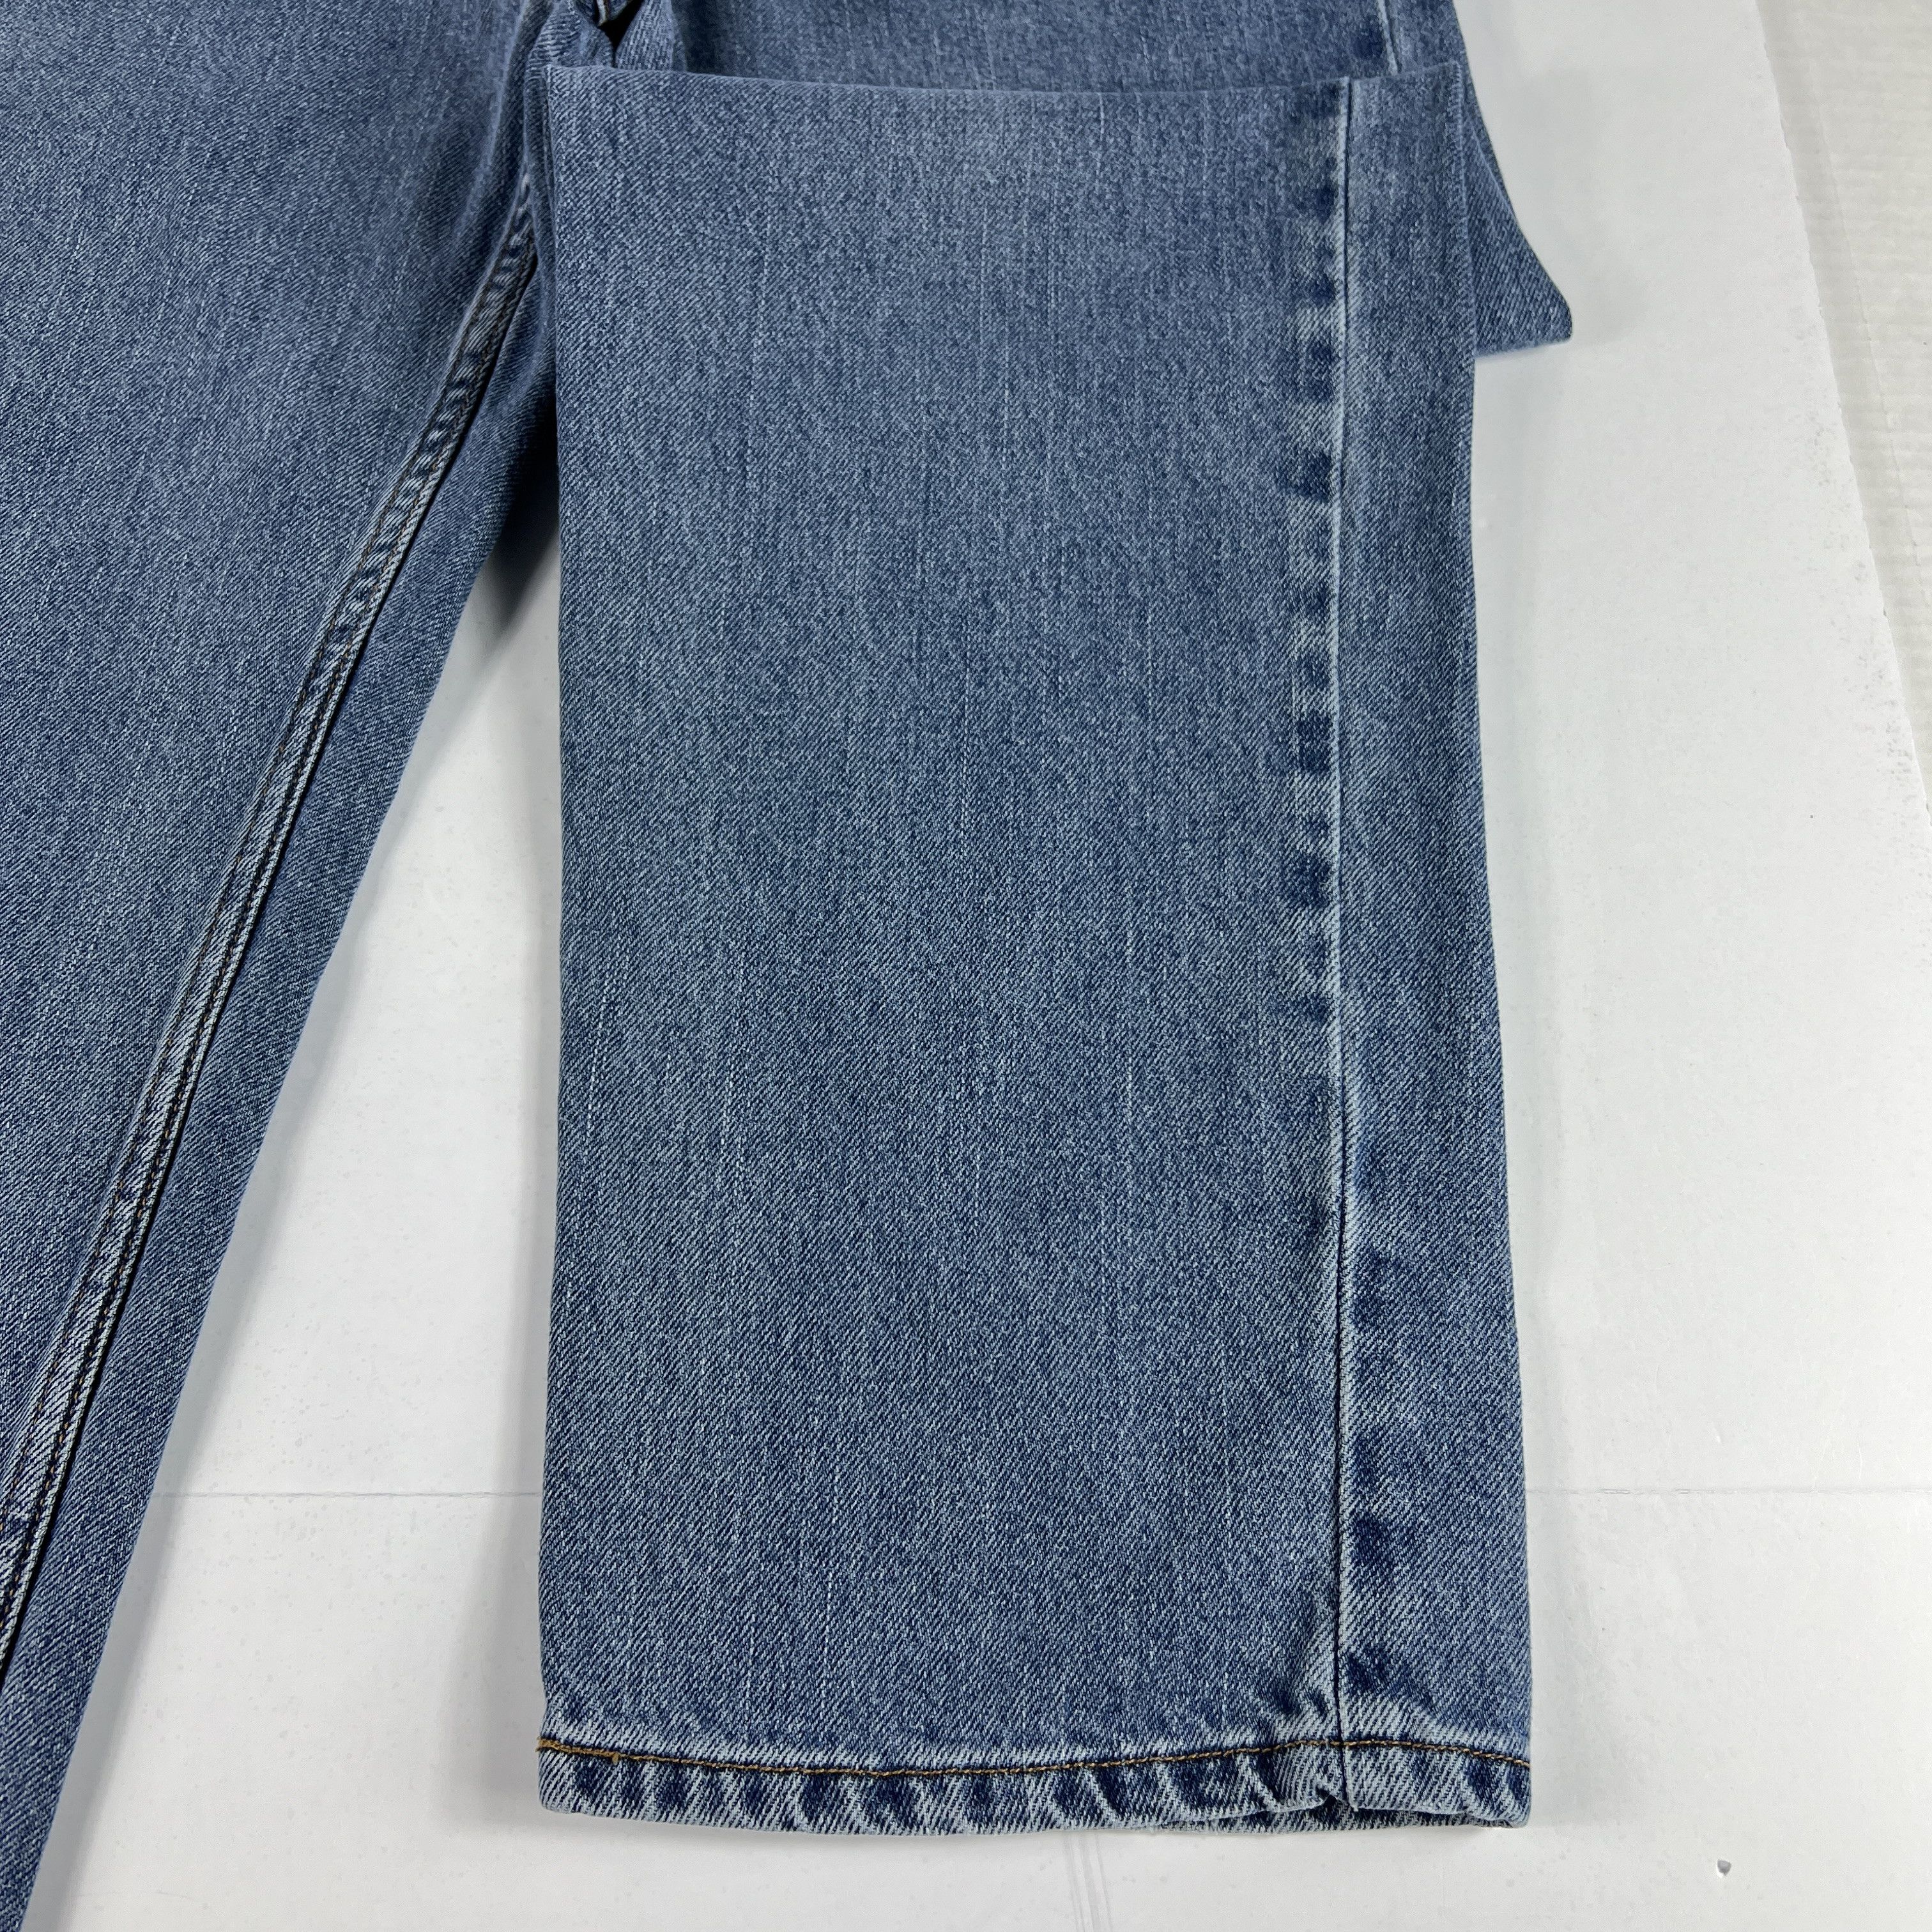 Levi's Y2K Levi's Jean 550 Relaxed Straight Blue Faded Cotton Denim Size US 34 / EU 50 - 5 Thumbnail